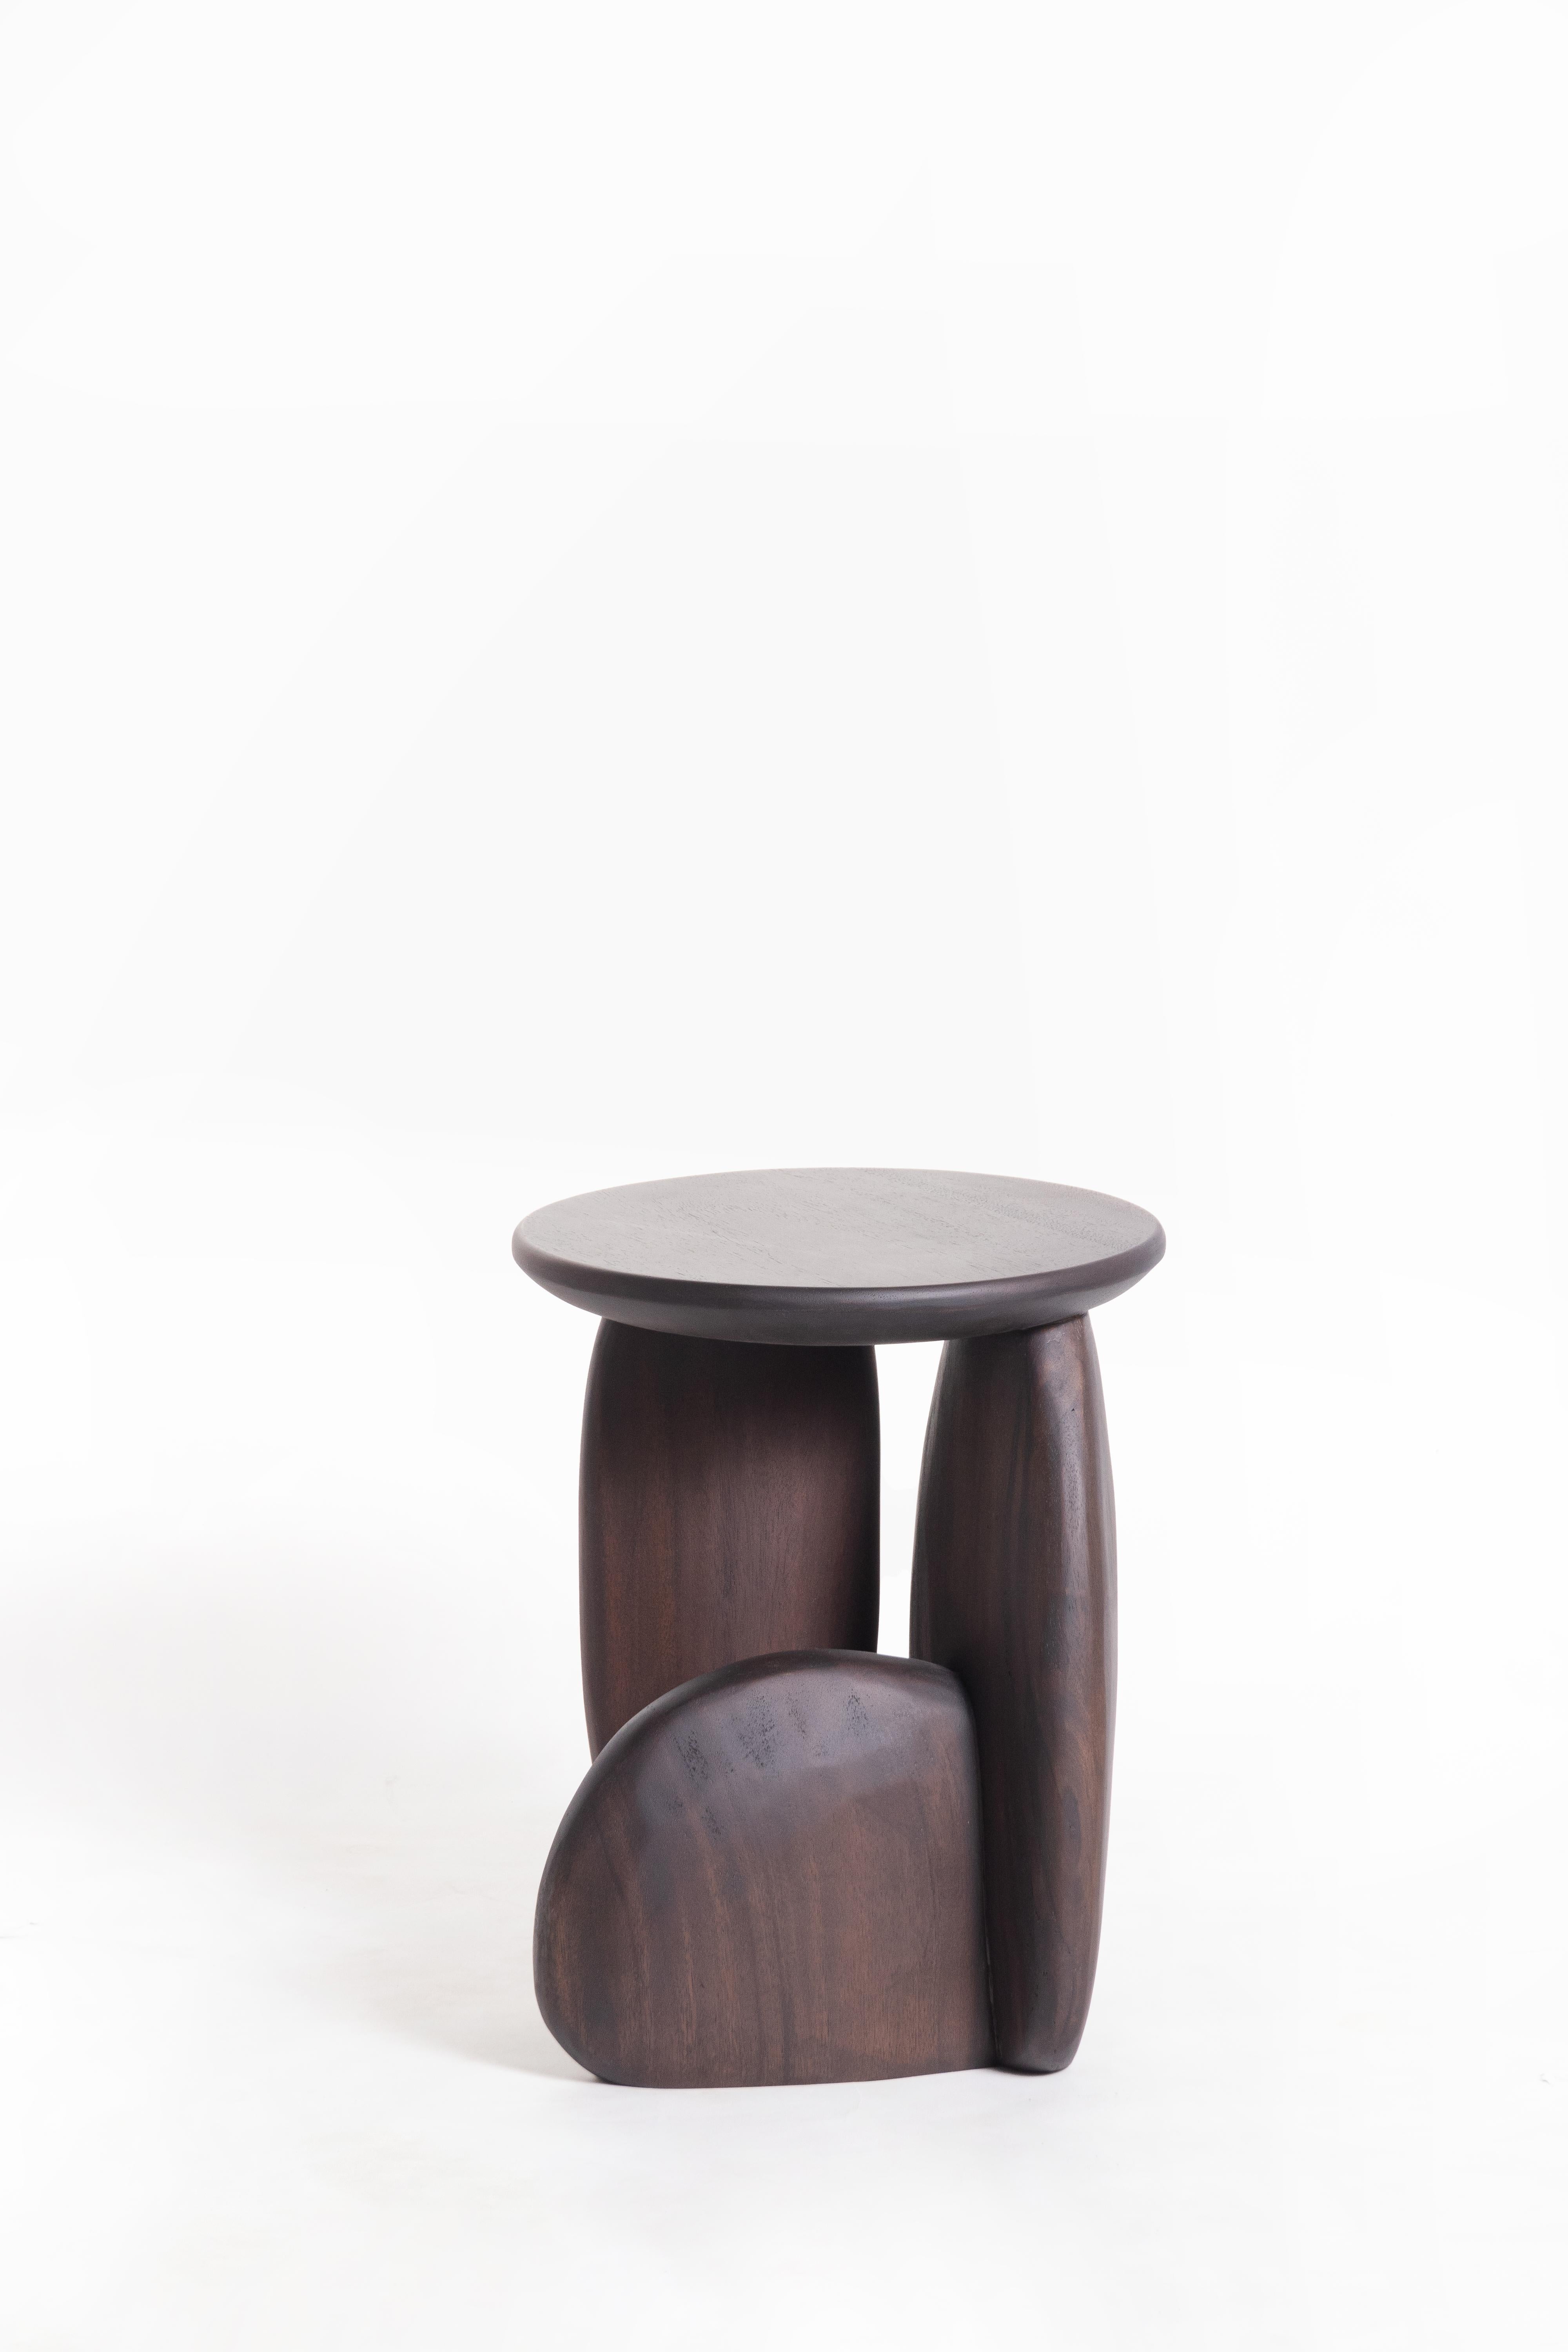 A three-legged wooden stool that looks like the arrangement of rock to form a structure. This work was born from the skill and instinct of a master craftsman where designers give the artisan a chance to create works without a clear plan until